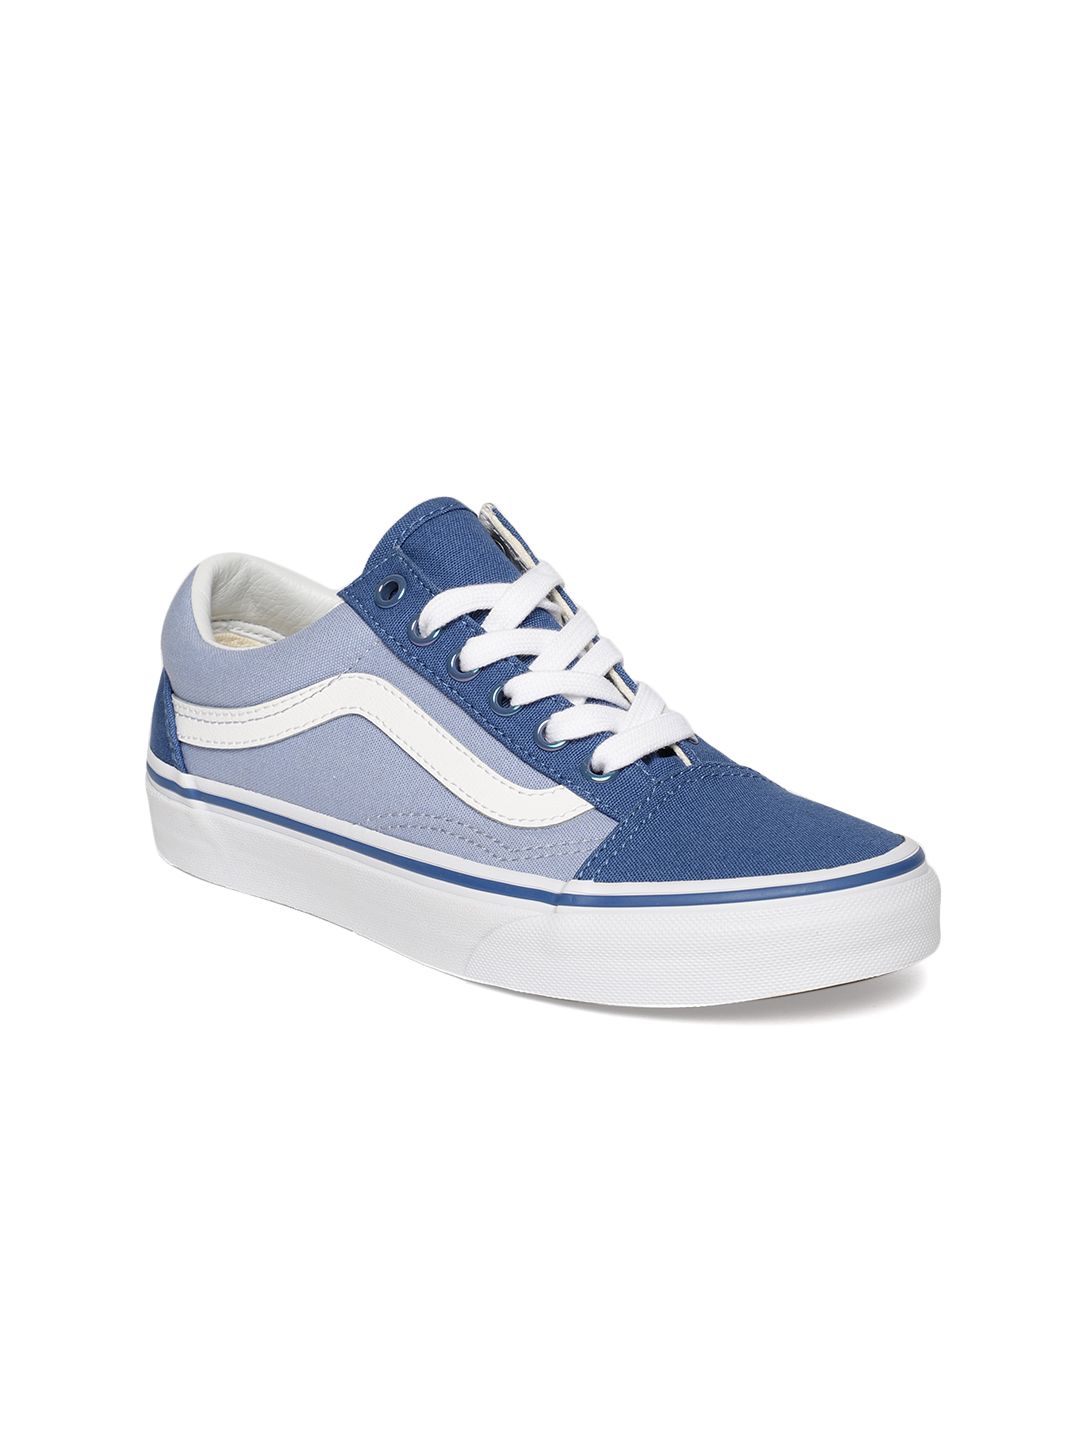 Vans Old Skool Navy Blue Sneakers for women - Get stylish shoes for ...